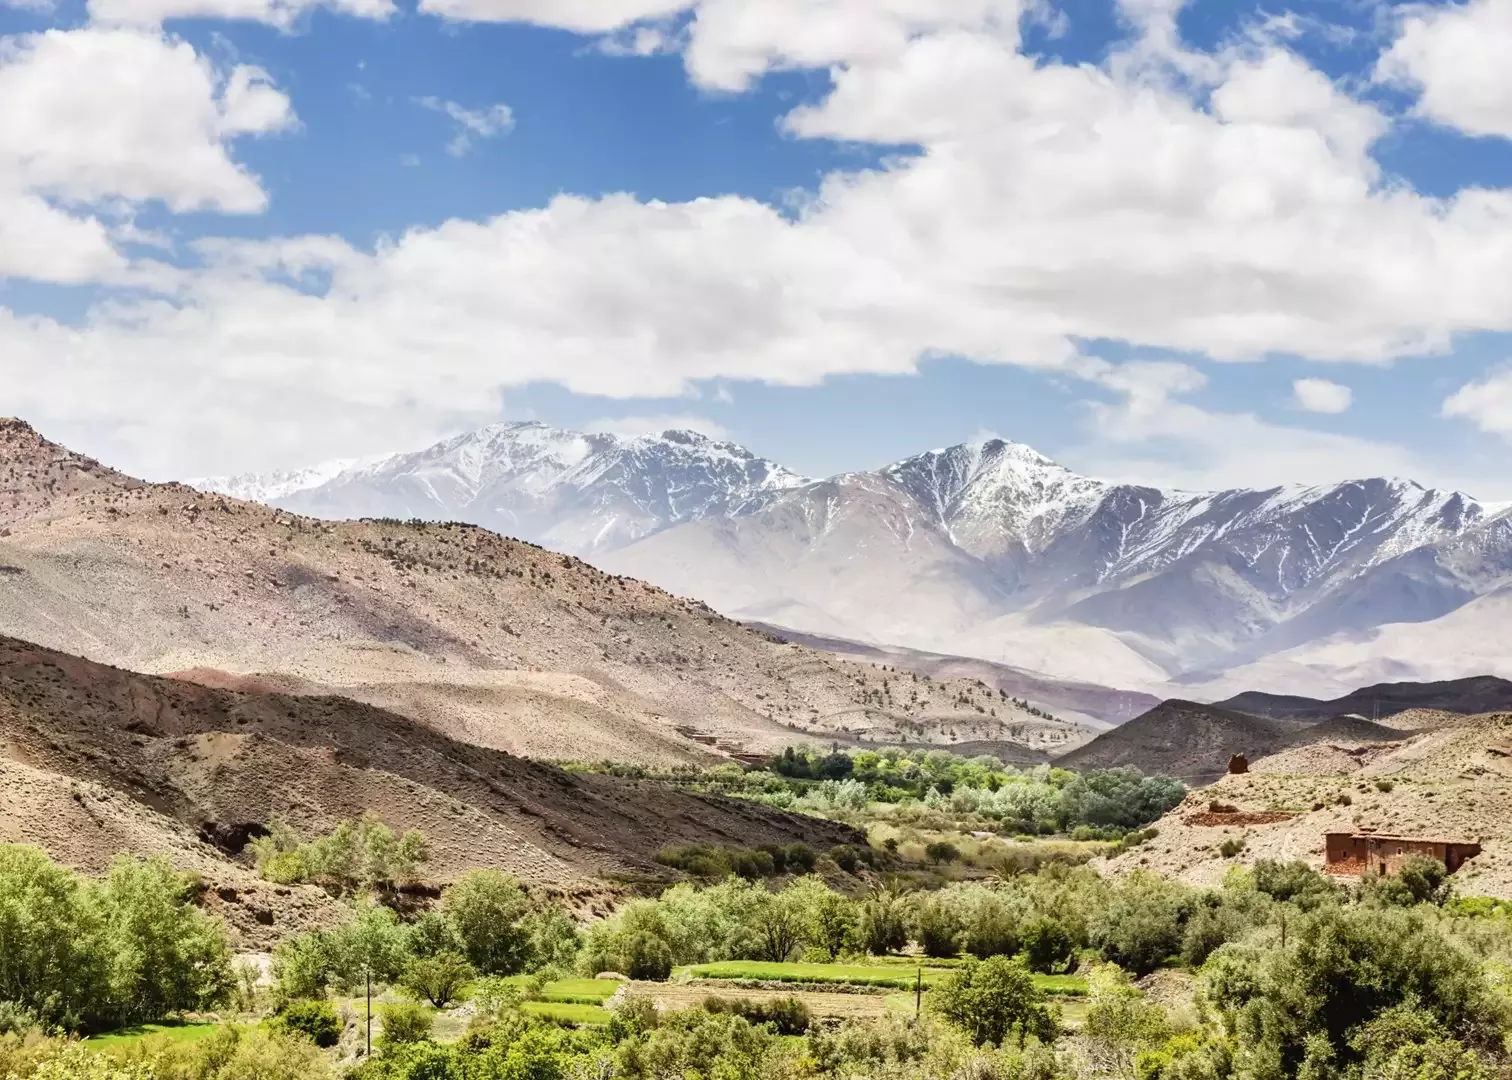 The view of the Atlas Mountains. Photo via audleytravel.org